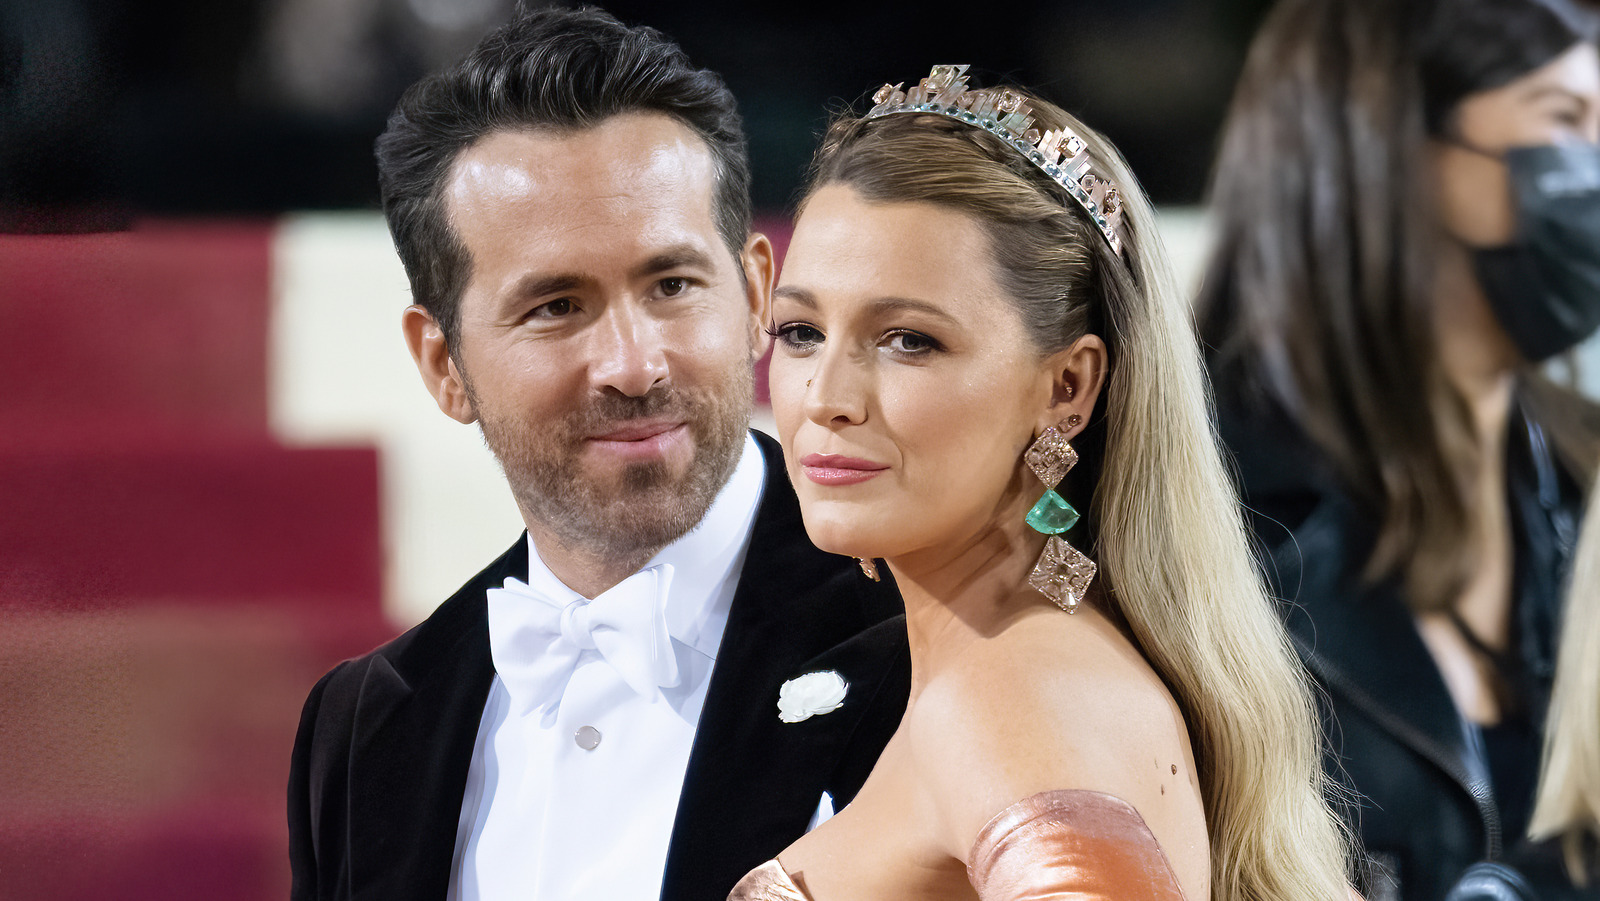 Blake Lively and Ryan Reynolds Reportedly Welcomed Their Third